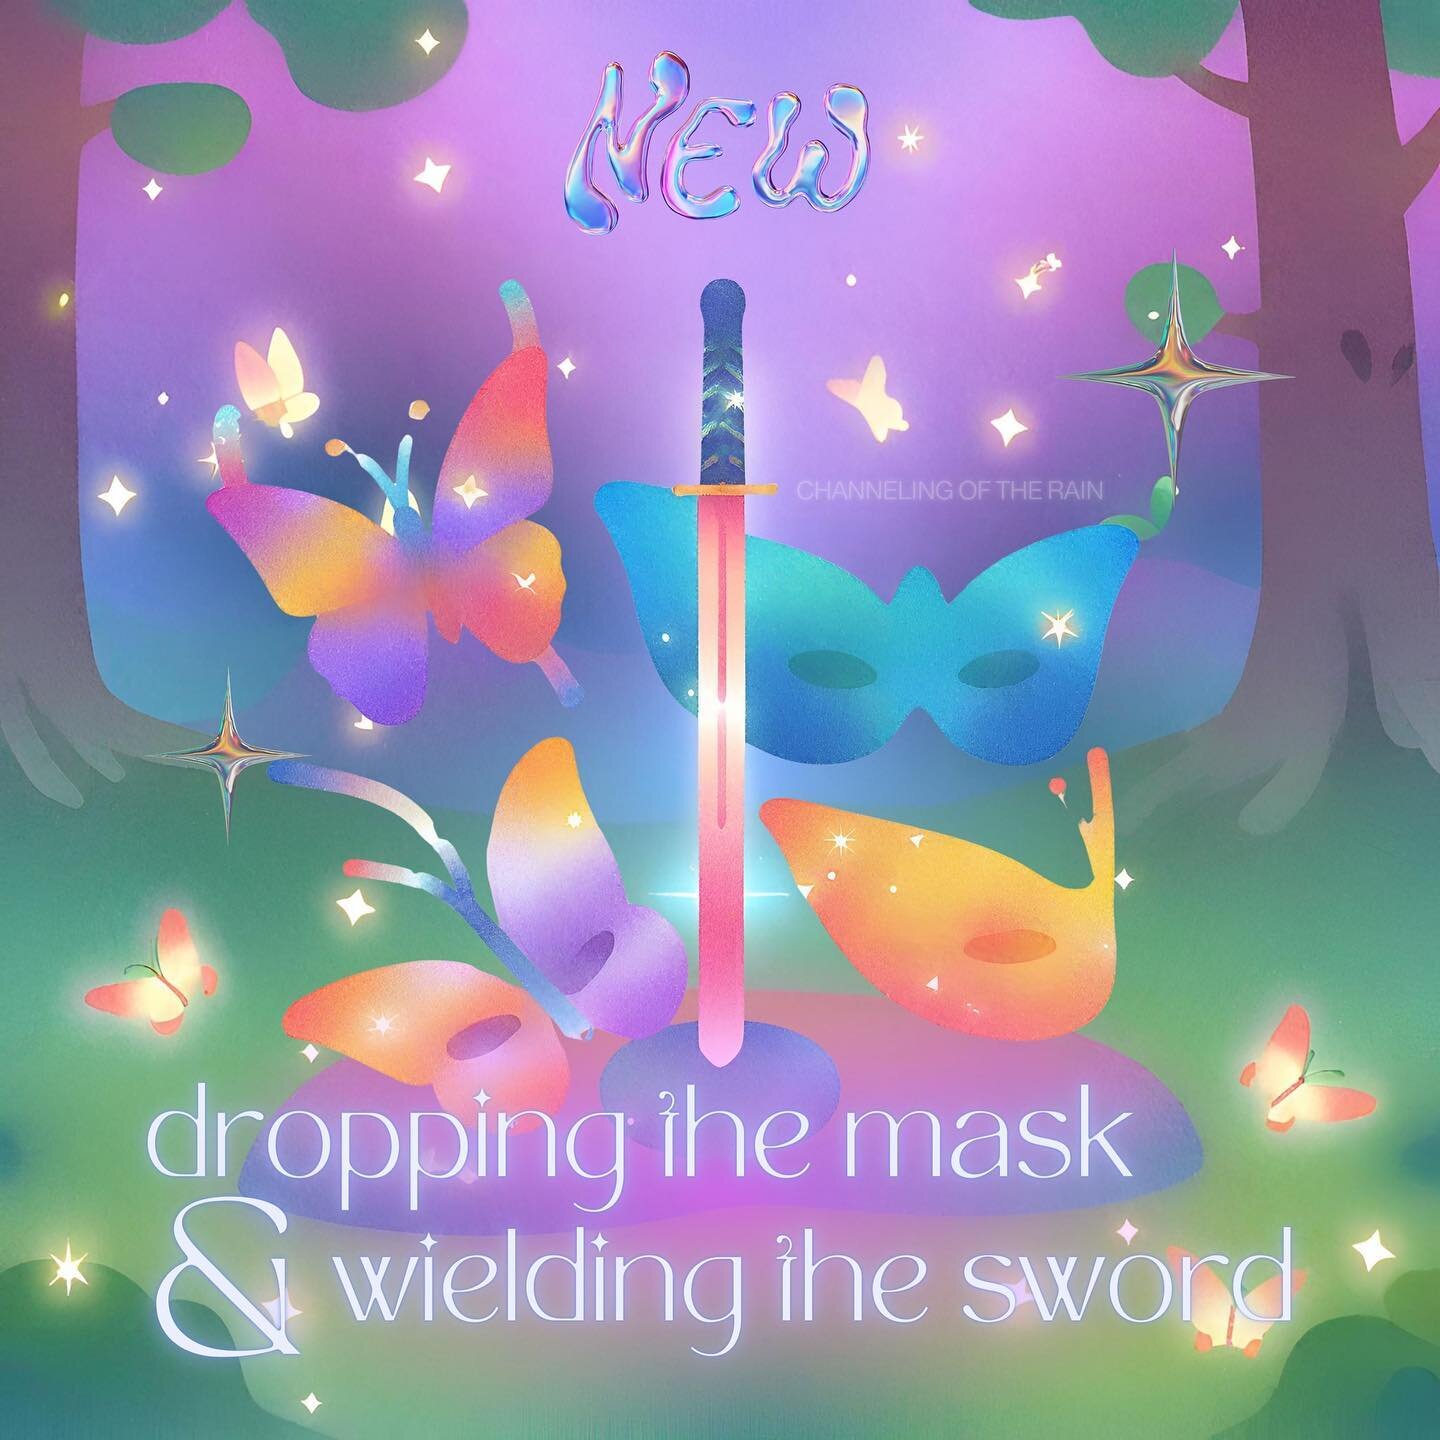 𝔫𝔢𝔴 𝔢𝔭𝔦𝔰𝔬𝔡𝔢 out now!ˎˊ˗ dropping the mask &amp; wielding the sword🗡️ 🦋💗
 
after a little cocoon time, we are back and ready to dive into the depths of our thoughts and emotions and emerge with newfound gold🌟✨💫
 
on today&rsquo;s episod